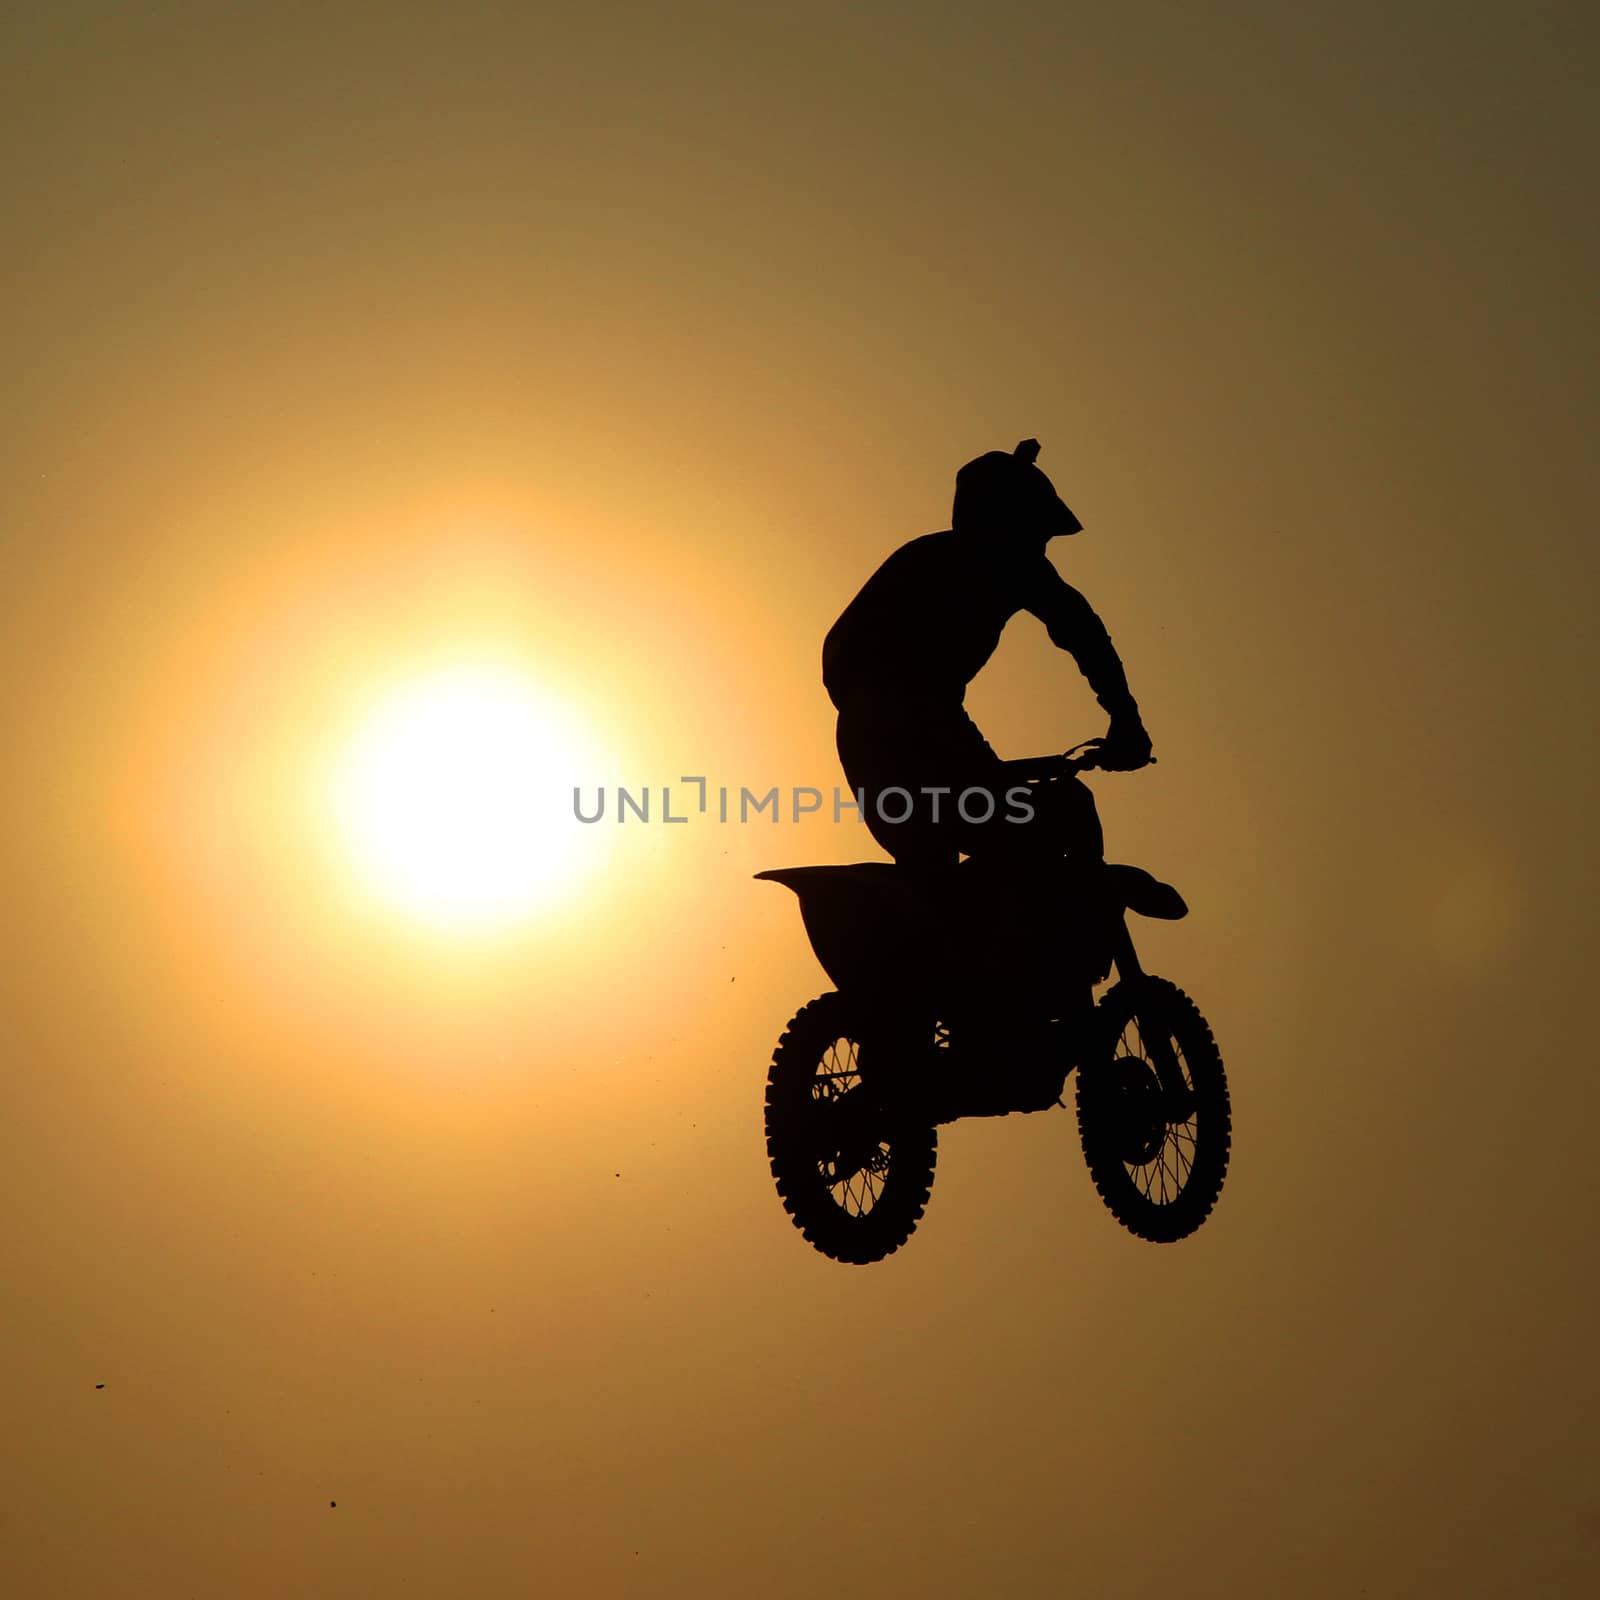 Motorcycle jumps in the air with sunset